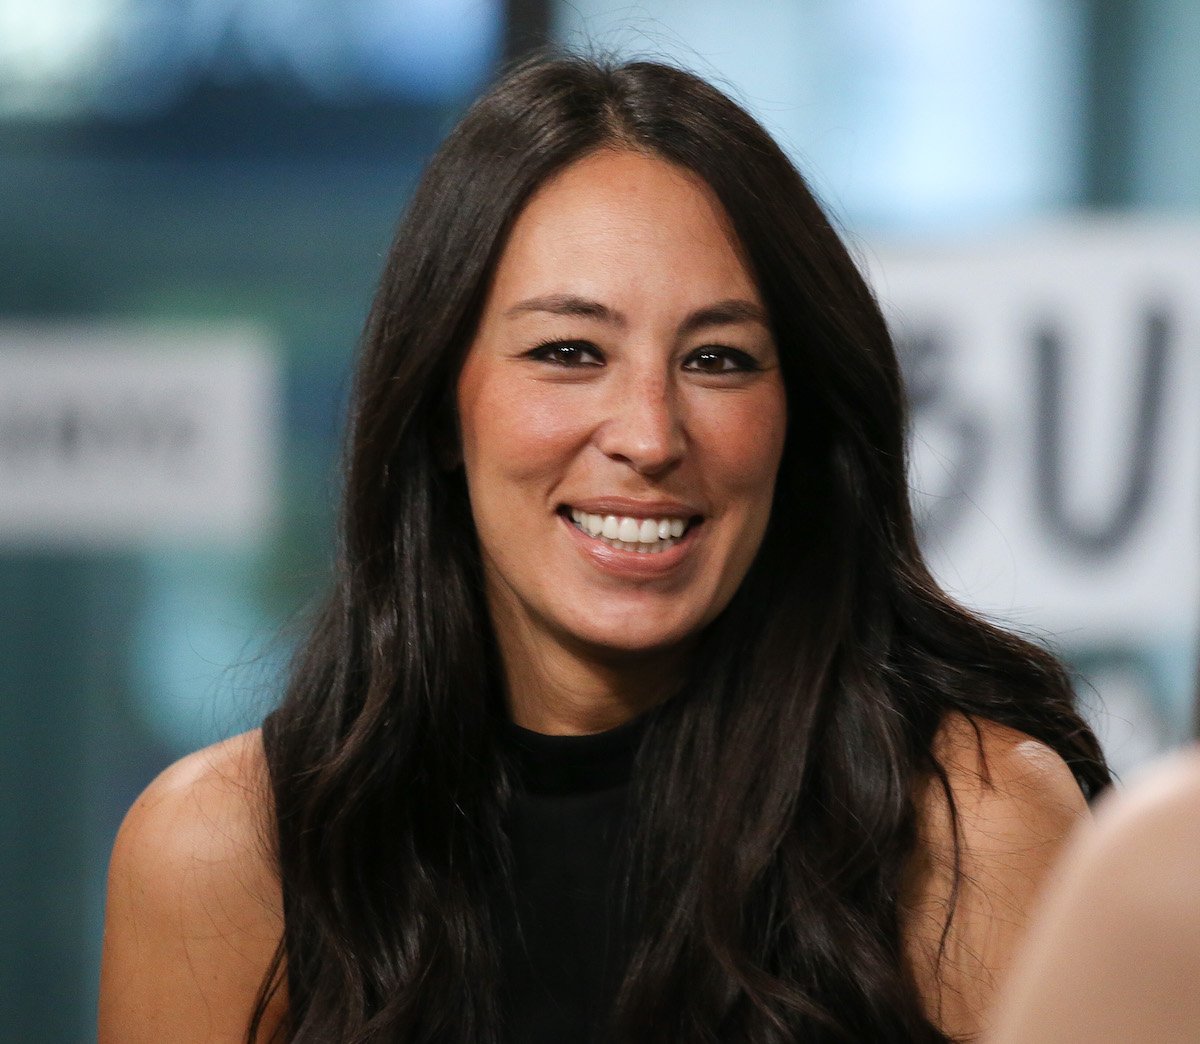 Joanna Gaines’ True Passion Is Not Real Estate or Design